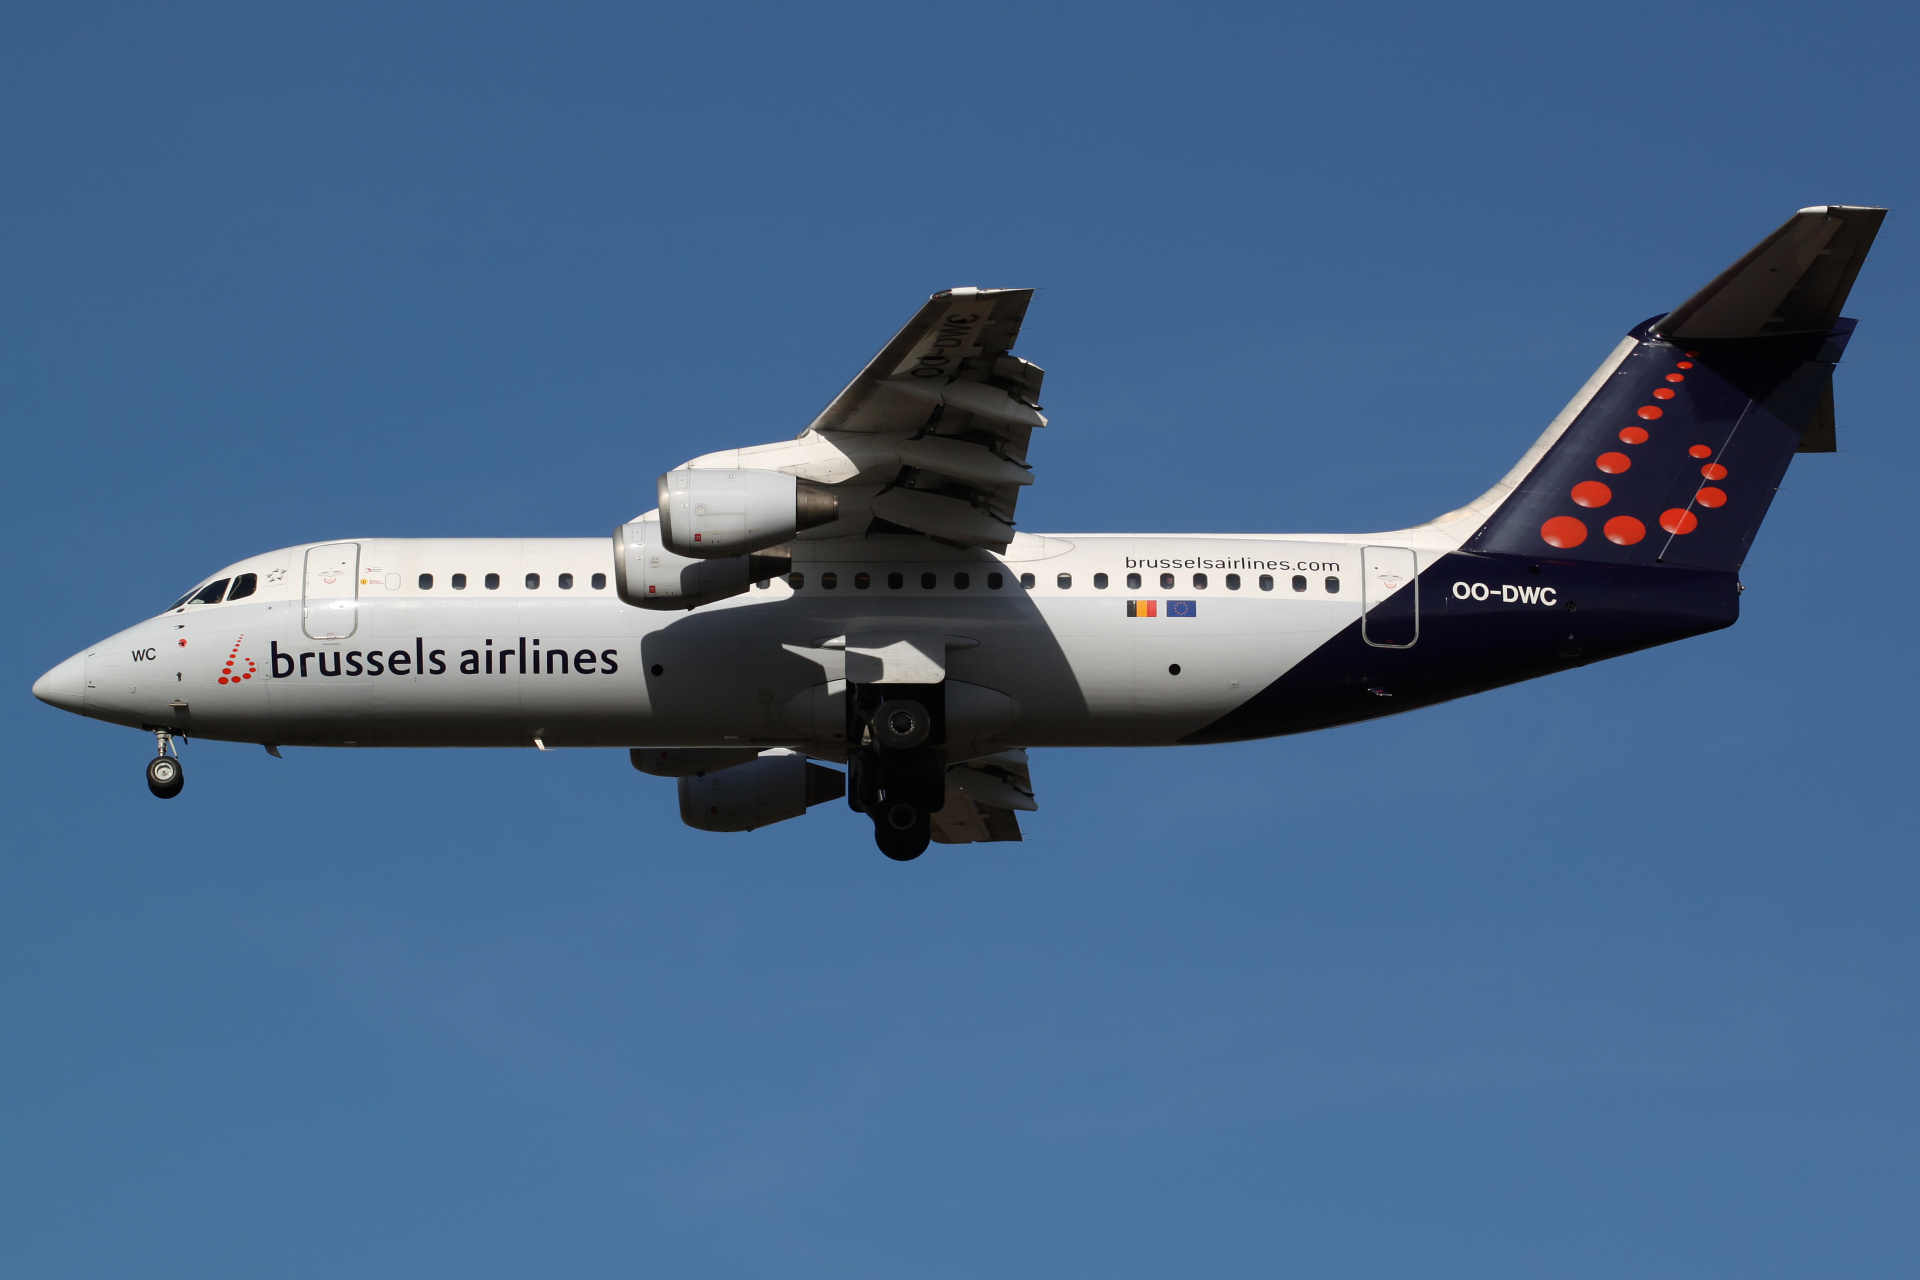 OO-DWC (Aircraft » EPWA Spotting » BAe 146 and revisions » Avro RJ100 » Brussels Airlines)